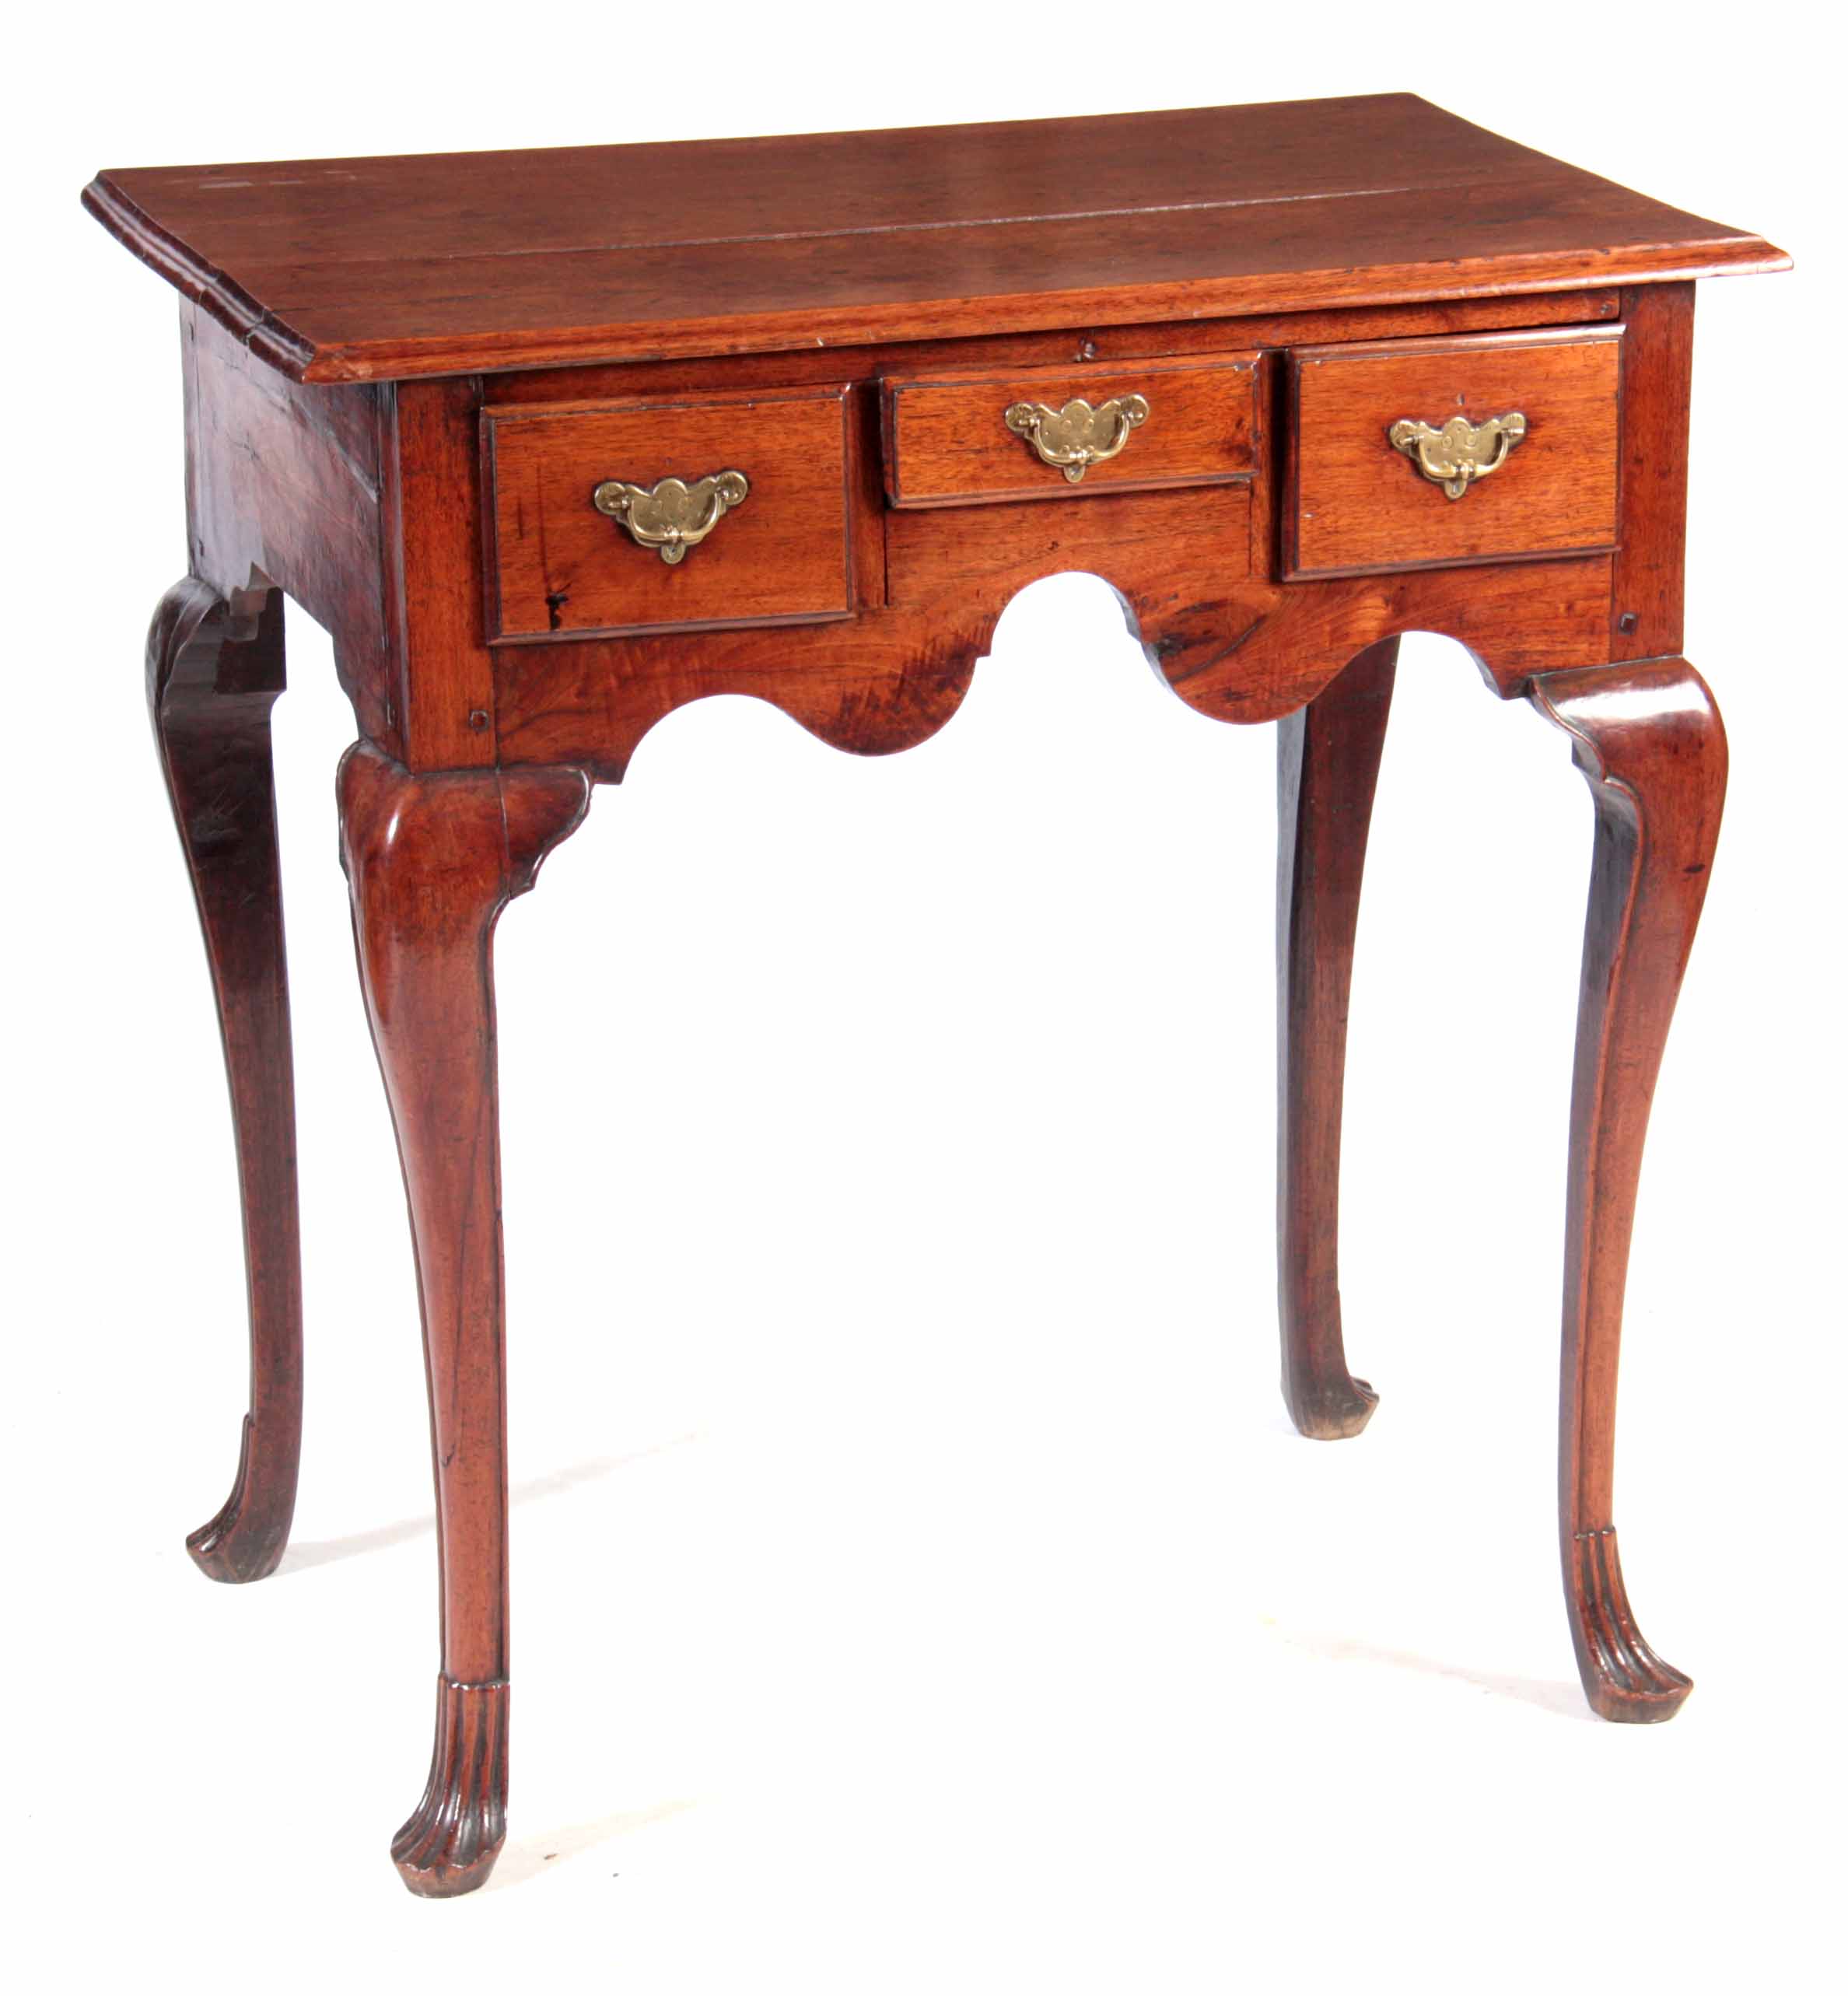 AN UNUSUAL SOLID WALNUT EARLY 18TH CENTURY LOWBOY POSSIBLY AMERICAN with moulded edge top above